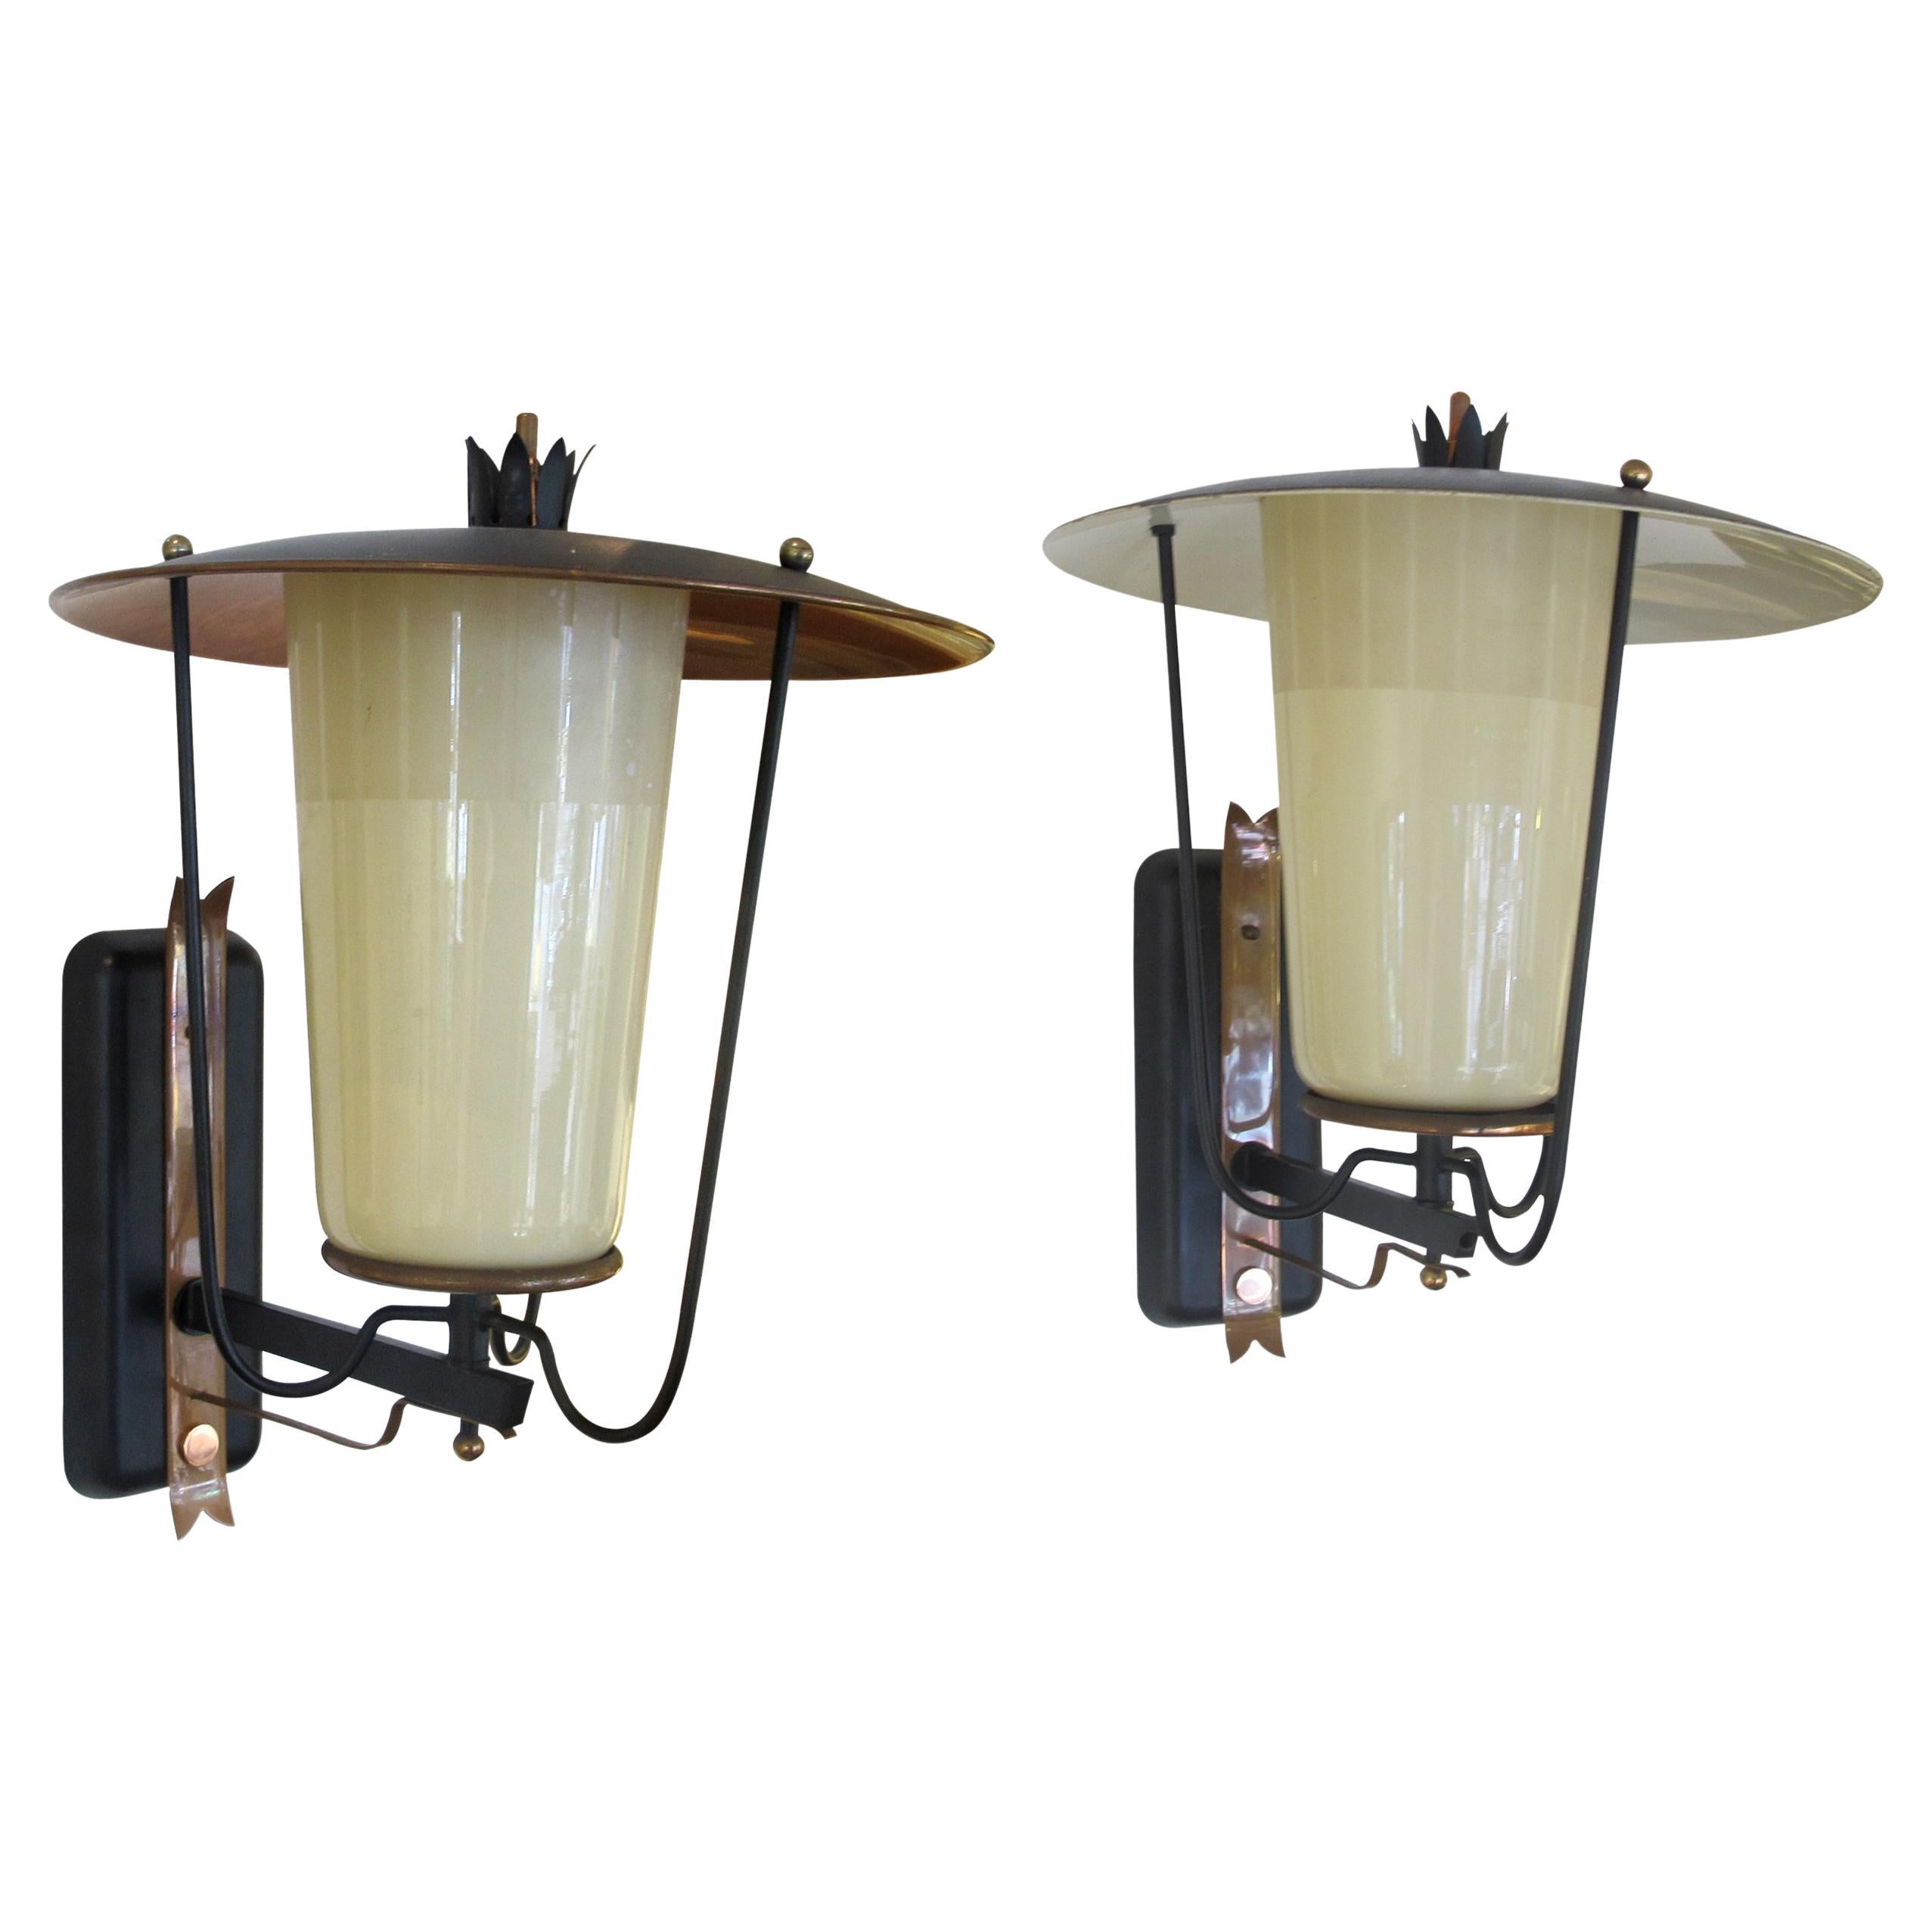 Pair of 1950s French Wall Mounted Opaque White Glass Shade Metal Lanterns